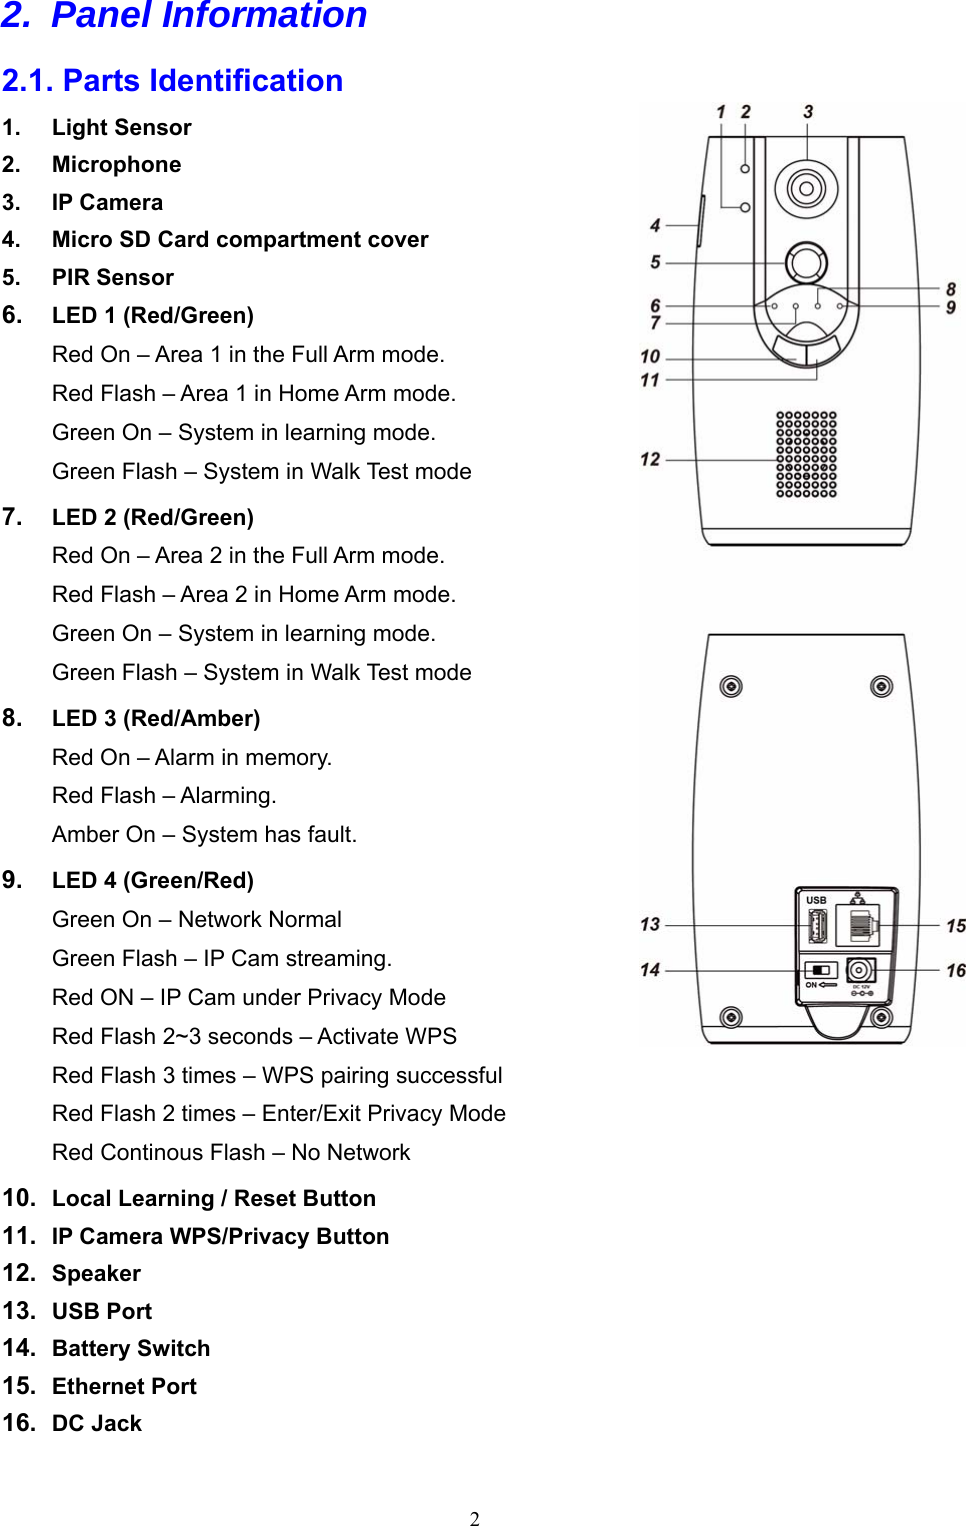  2 2. Panel Information  2.1. Parts Identification 1.  Light Sensor 2.  Microphone 3.  IP Camera 4.  Micro SD Card compartment cover 5.  PIR Sensor 6.  LED 1 (Red/Green) Red On – Area 1 in the Full Arm mode.   Red Flash – Area 1 in Home Arm mode. Green On – System in learning mode. Green Flash – System in Walk Test mode 7.  LED 2 (Red/Green) Red On – Area 2 in the Full Arm mode.   Red Flash – Area 2 in Home Arm mode. Green On – System in learning mode. Green Flash – System in Walk Test mode 8.  LED 3 (Red/Amber) Red On – Alarm in memory.   Red Flash – Alarming. Amber On – System has fault. 9.  LED 4 (Green/Red) Green On – Network Normal Green Flash – IP Cam streaming.   Red ON – IP Cam under Privacy Mode Red Flash 2~3 seconds – Activate WPS Red Flash 3 times – WPS pairing successful Red Flash 2 times – Enter/Exit Privacy Mode Red Continous Flash – No Network 10.  Local Learning / Reset Button 11.  IP Camera WPS/Privacy Button 12.  Speaker 13.  USB Port 14.  Battery Switch 15.  Ethernet Port 16.  DC Jack  